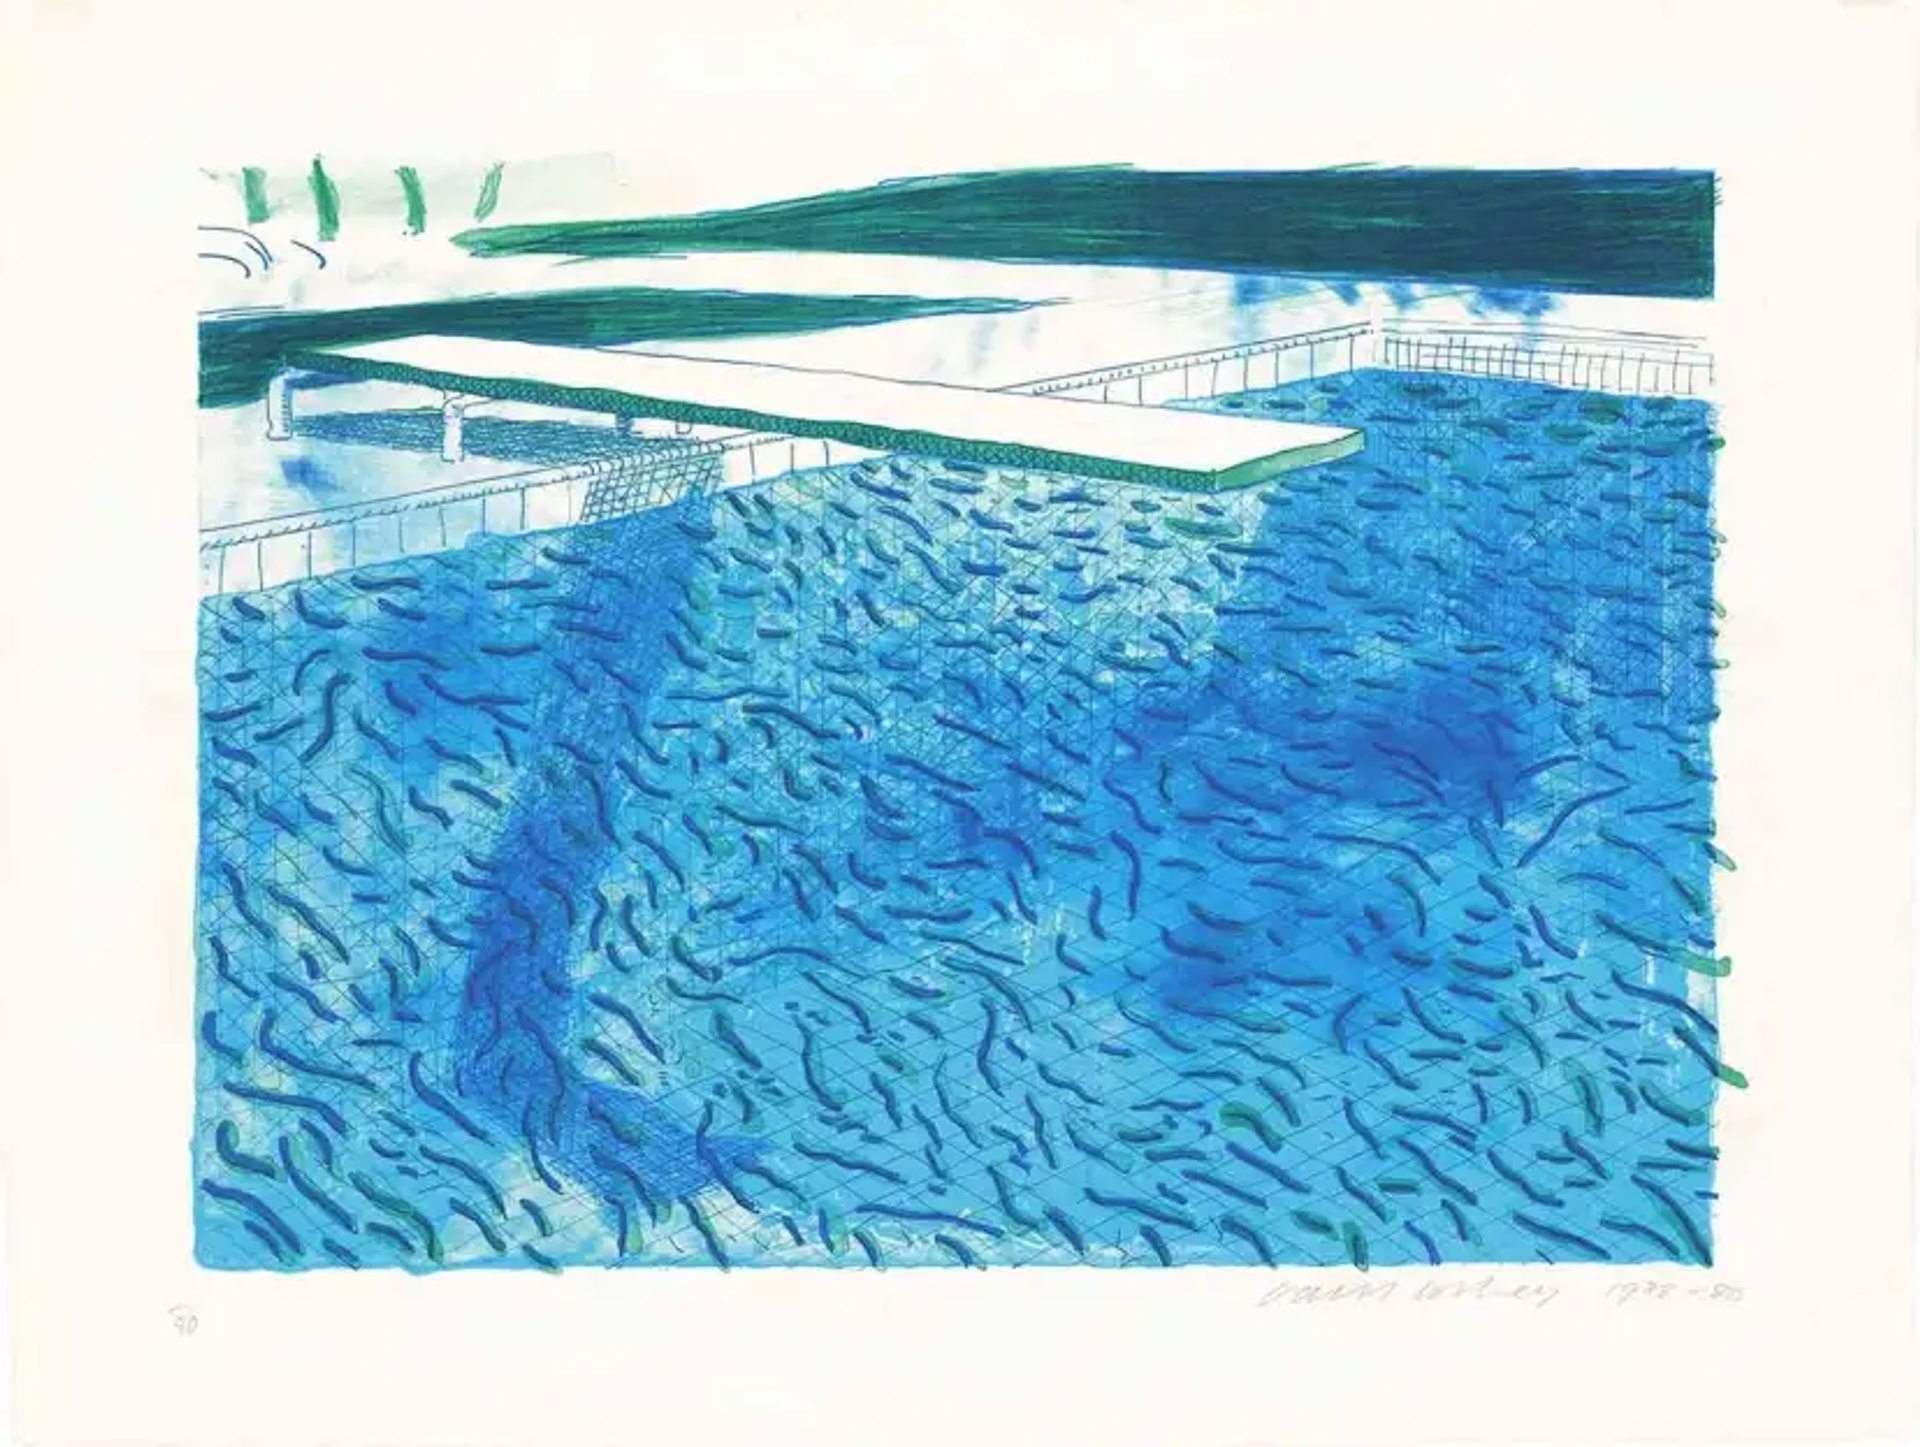 This lithograph by David Hockneys hows a large, bright blue swimming pool, with a green and white diving board at its edge.